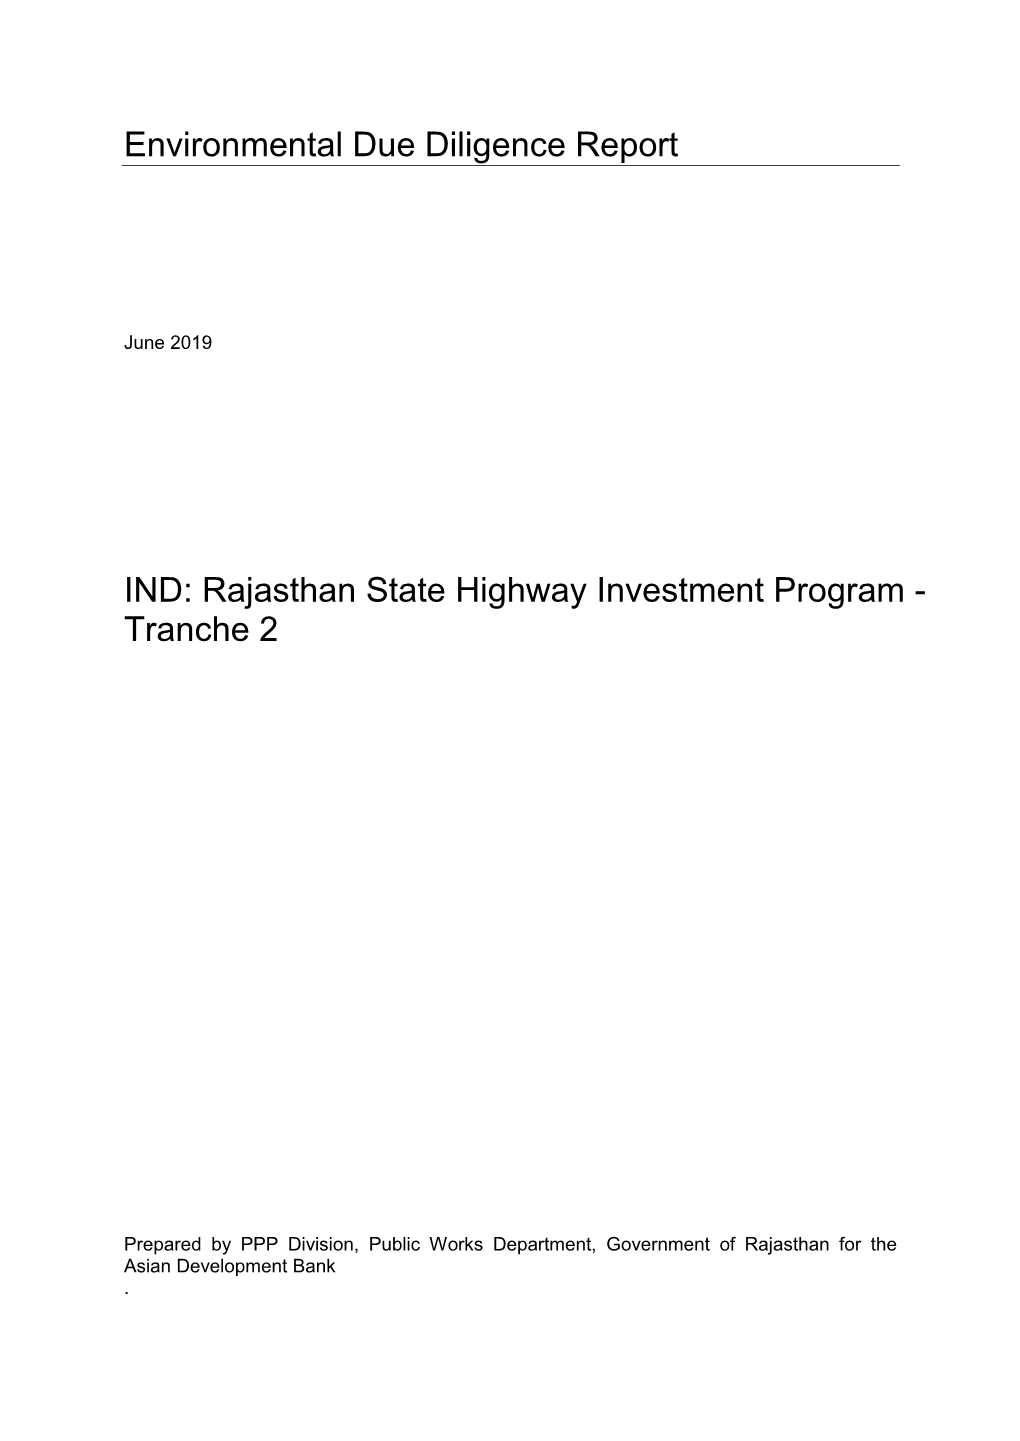 Environmental Due Diligence Report IND: Rajasthan State Highway